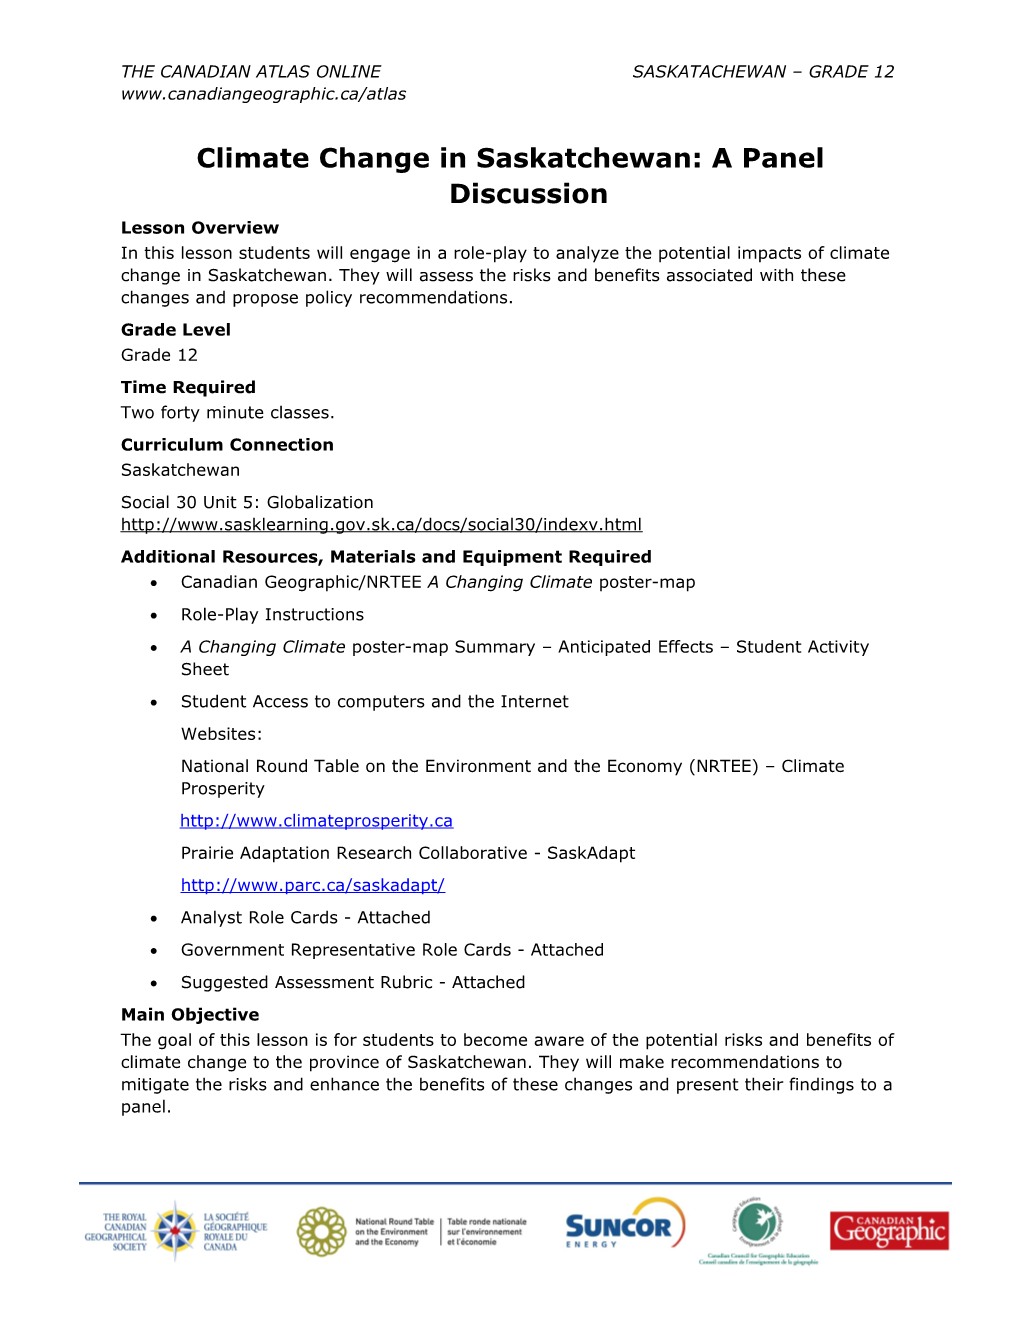 Climate Change in Saskatchewan: a Panel Discussion